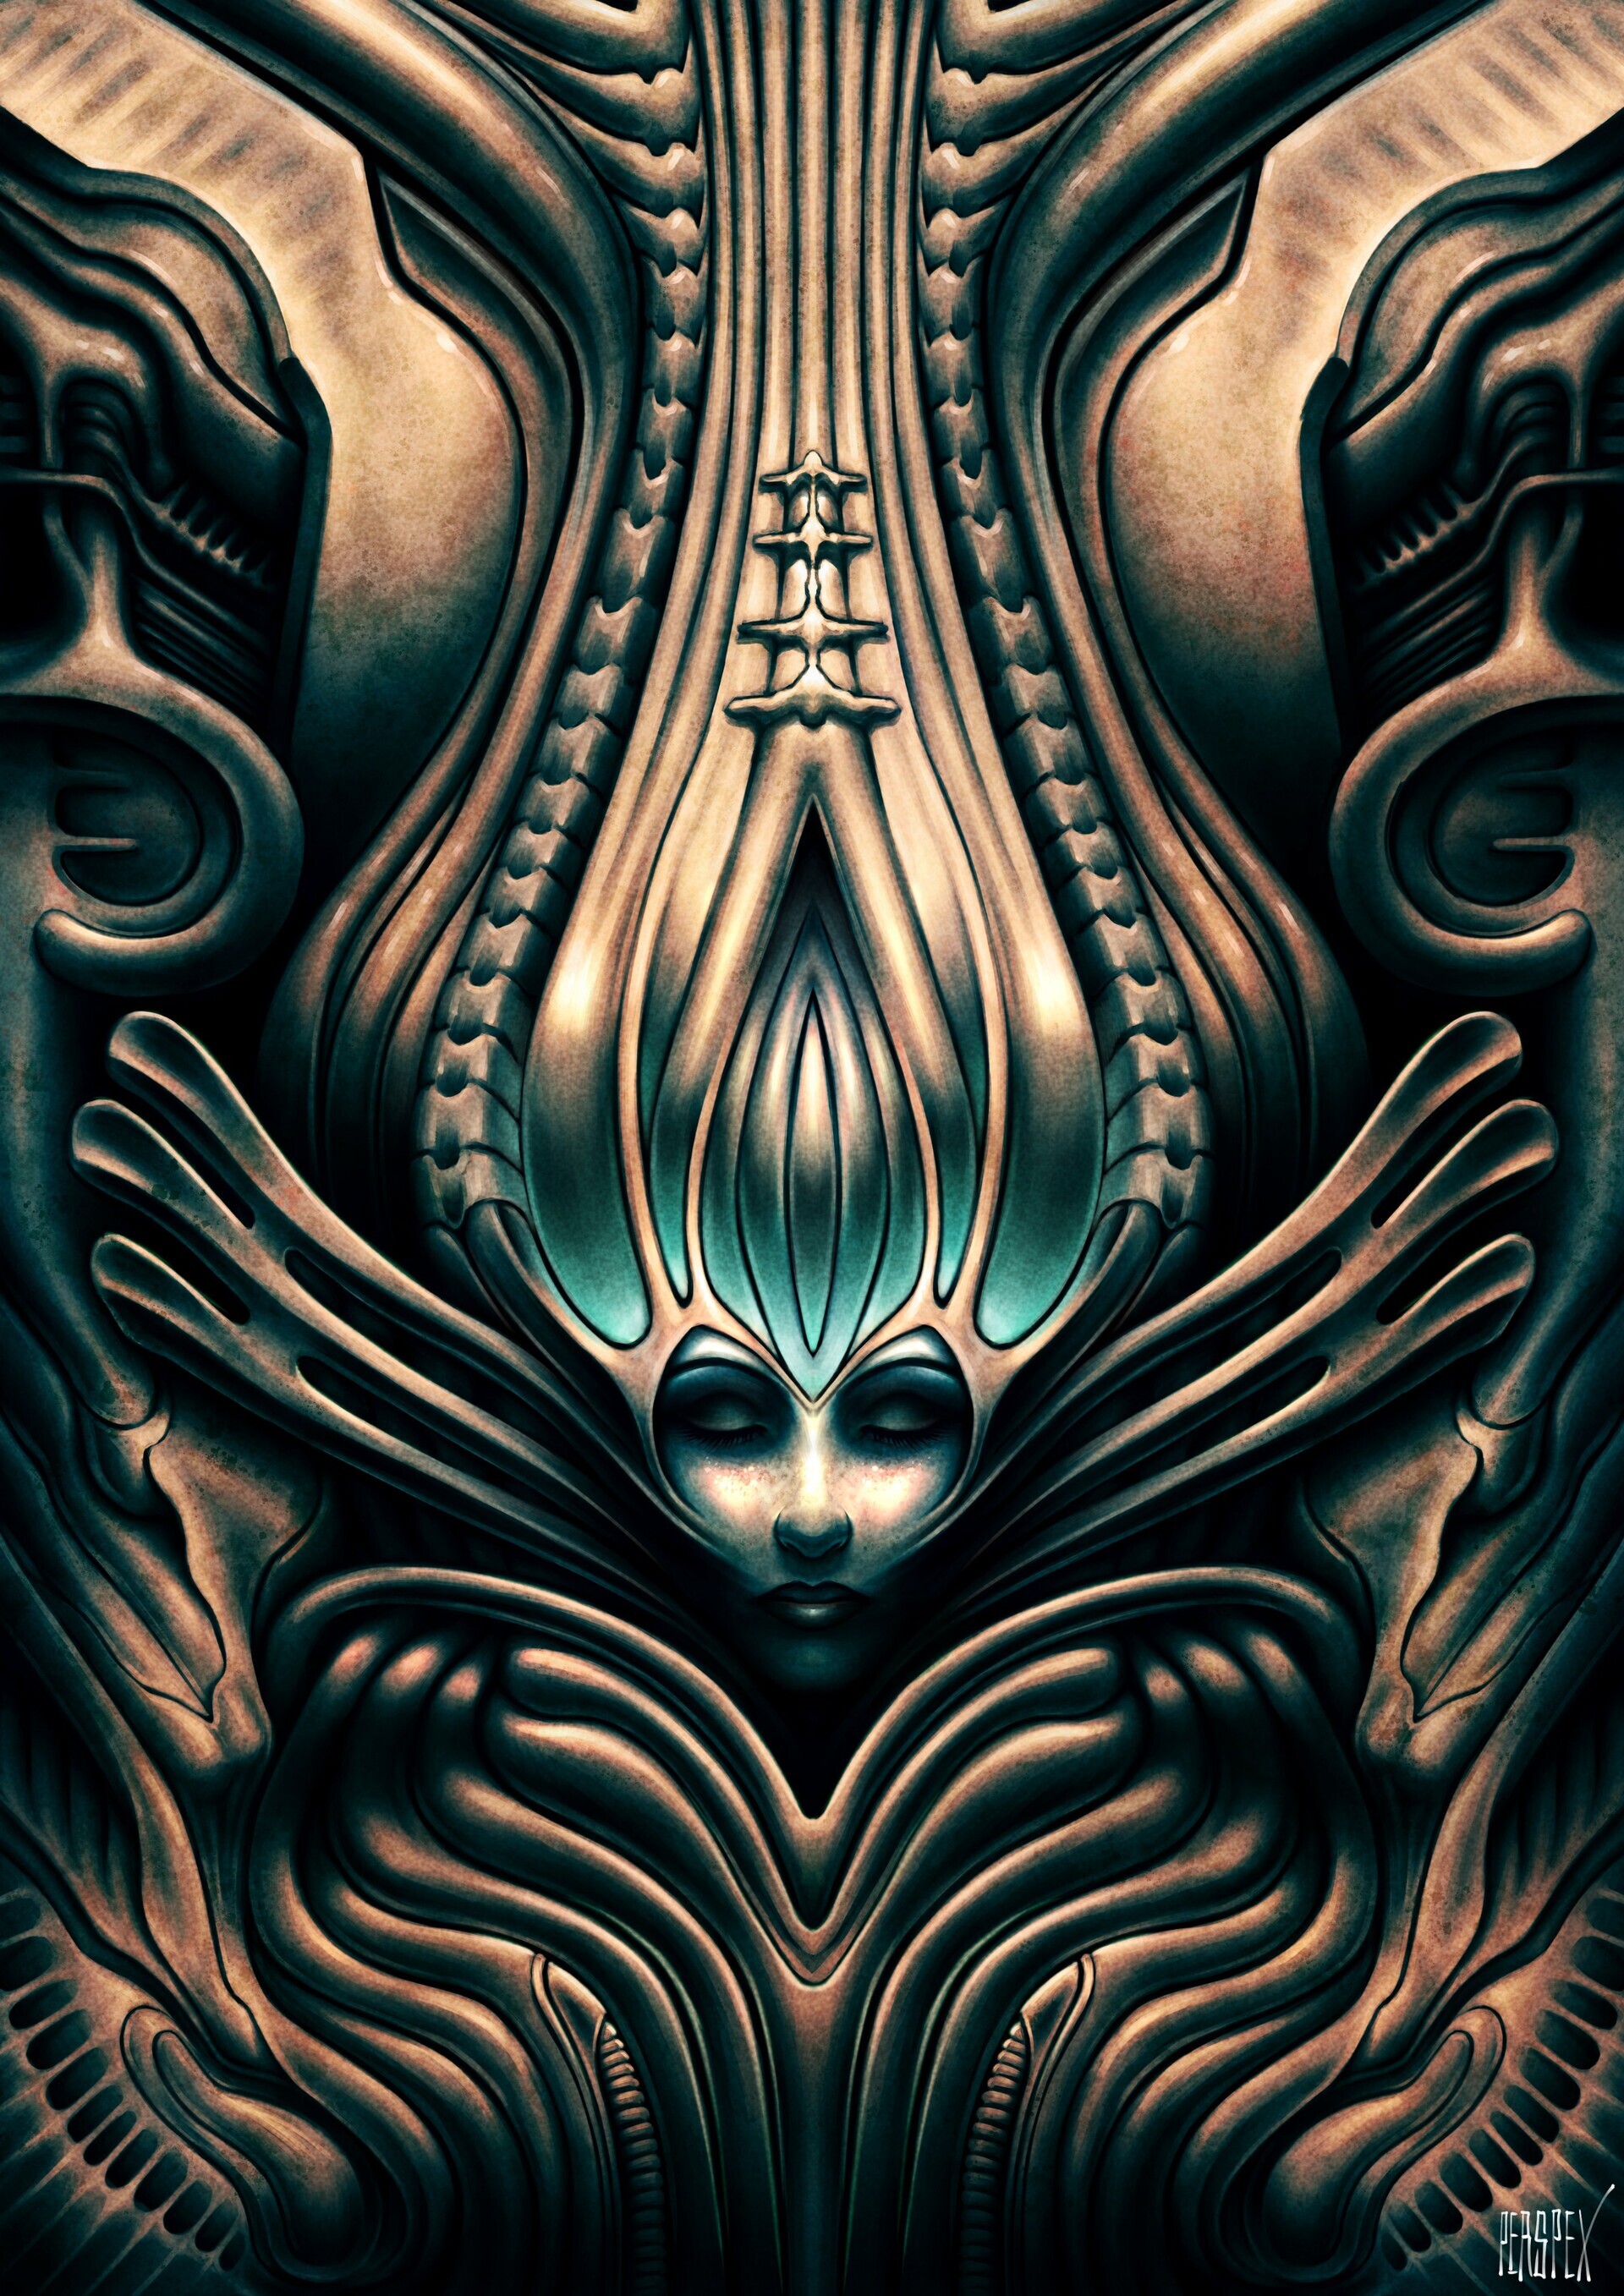 H.R. Giger: A Swiss Artist Best Known For His Airbrushed Paintings, Blended Human Physiques With Machines. 1920x2720 HD Wallpaper.